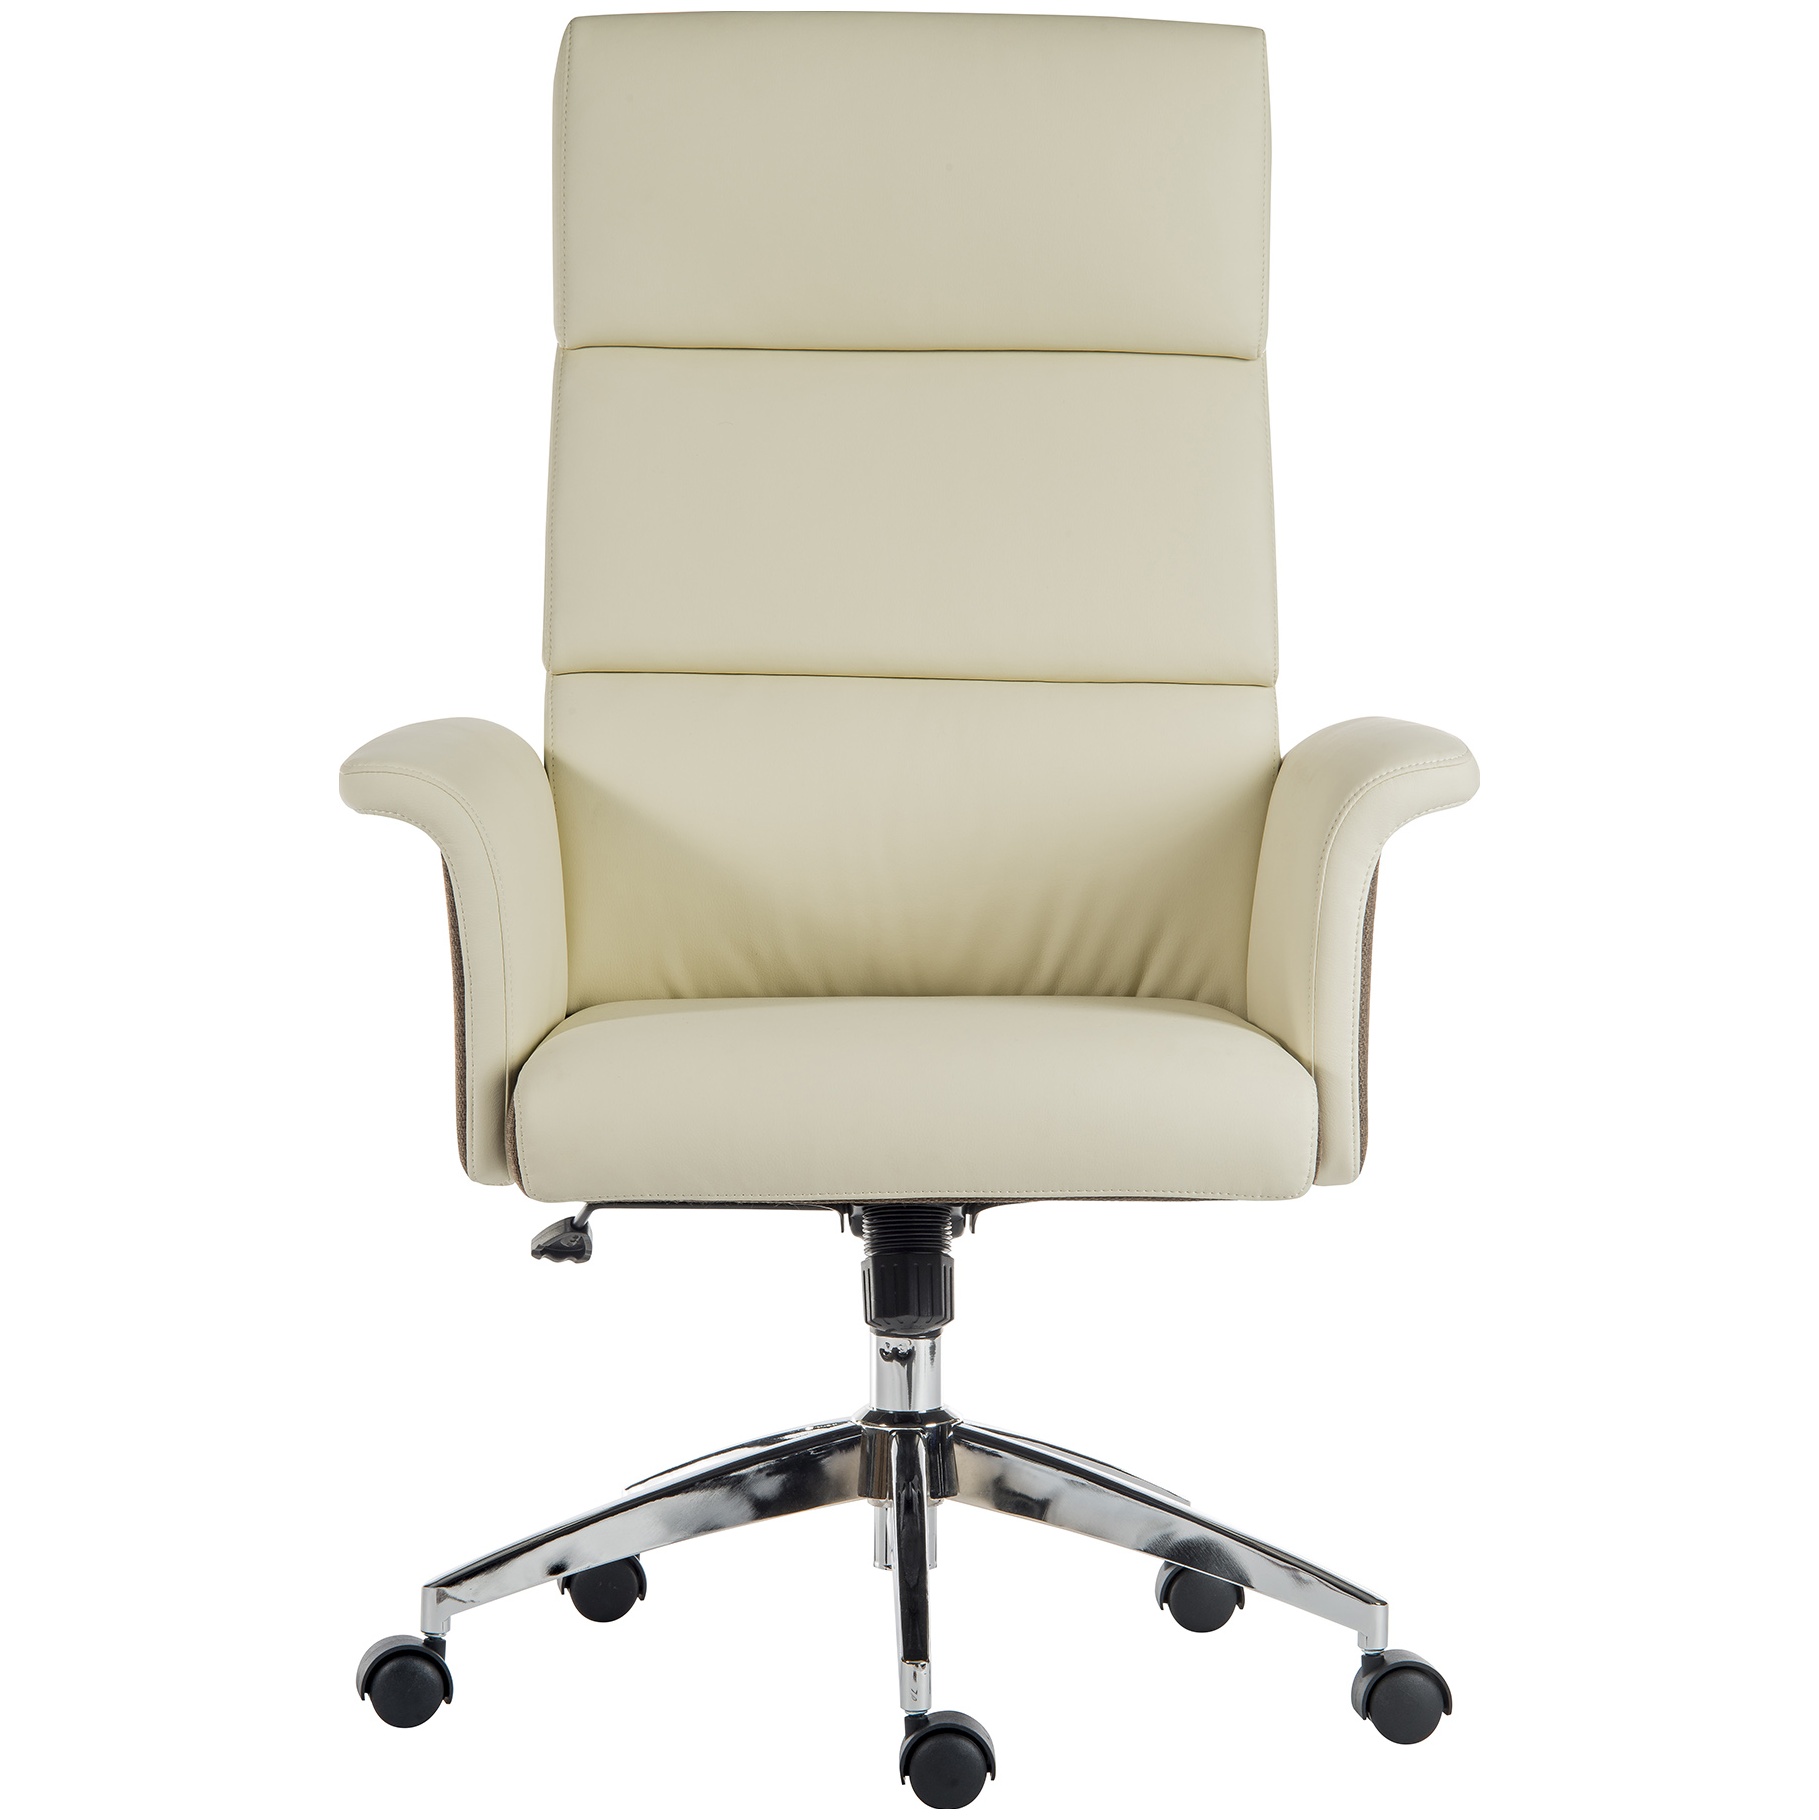 Back Leather Look Executive Chair Cream, Executive High Back Leather Chair